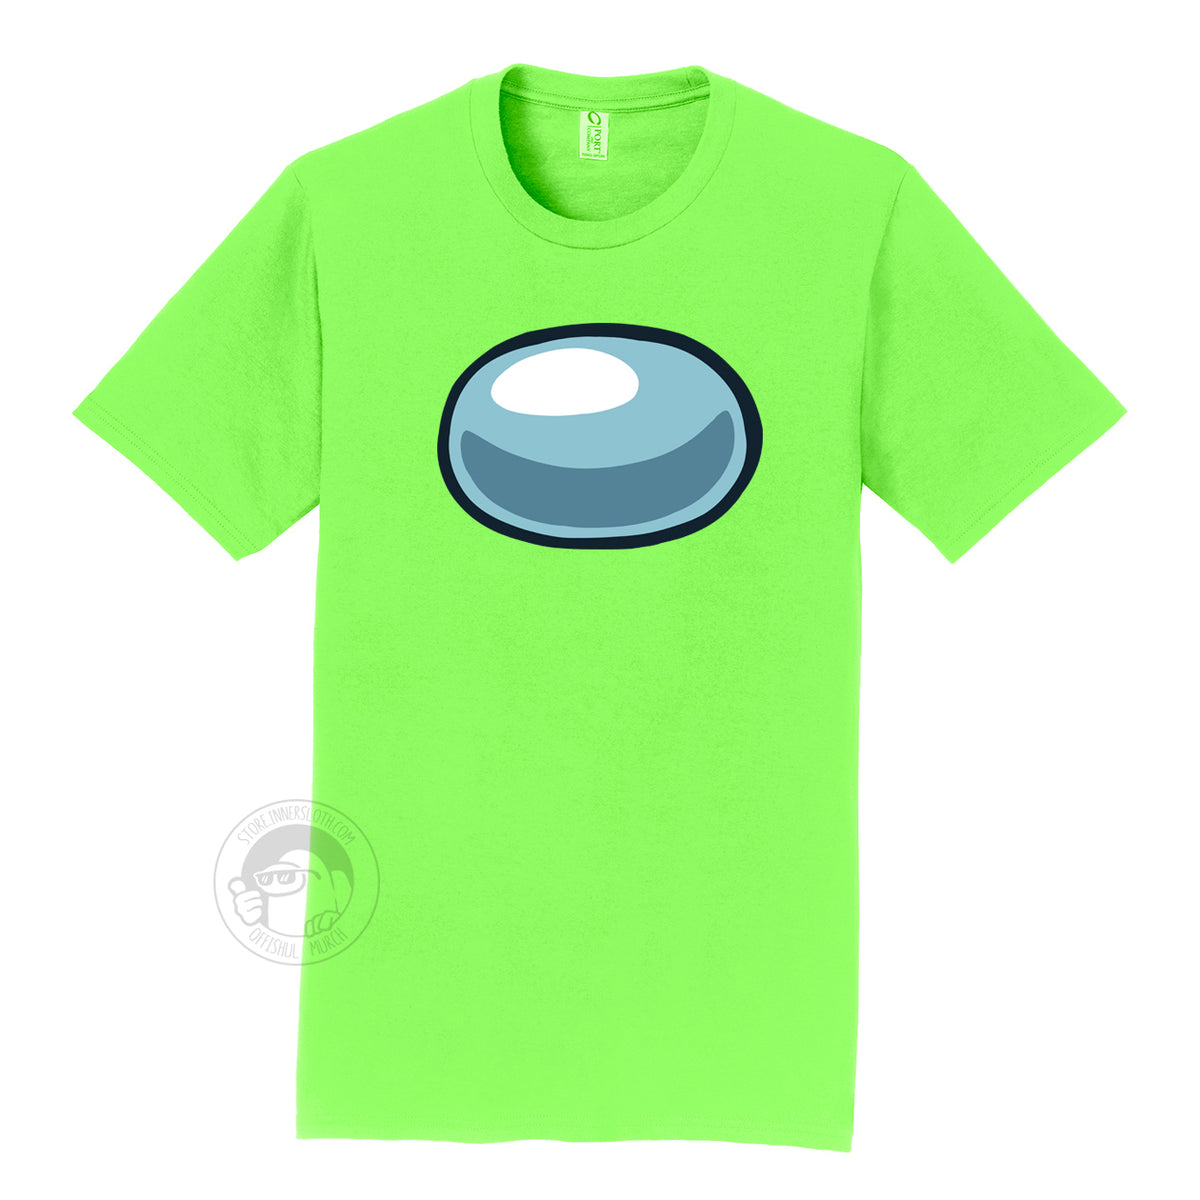 A product photograph of the Among Us: Crewmate Tee in lime green. The shirt depicts the crewmate&#39;s visor on the chest of the shirt.